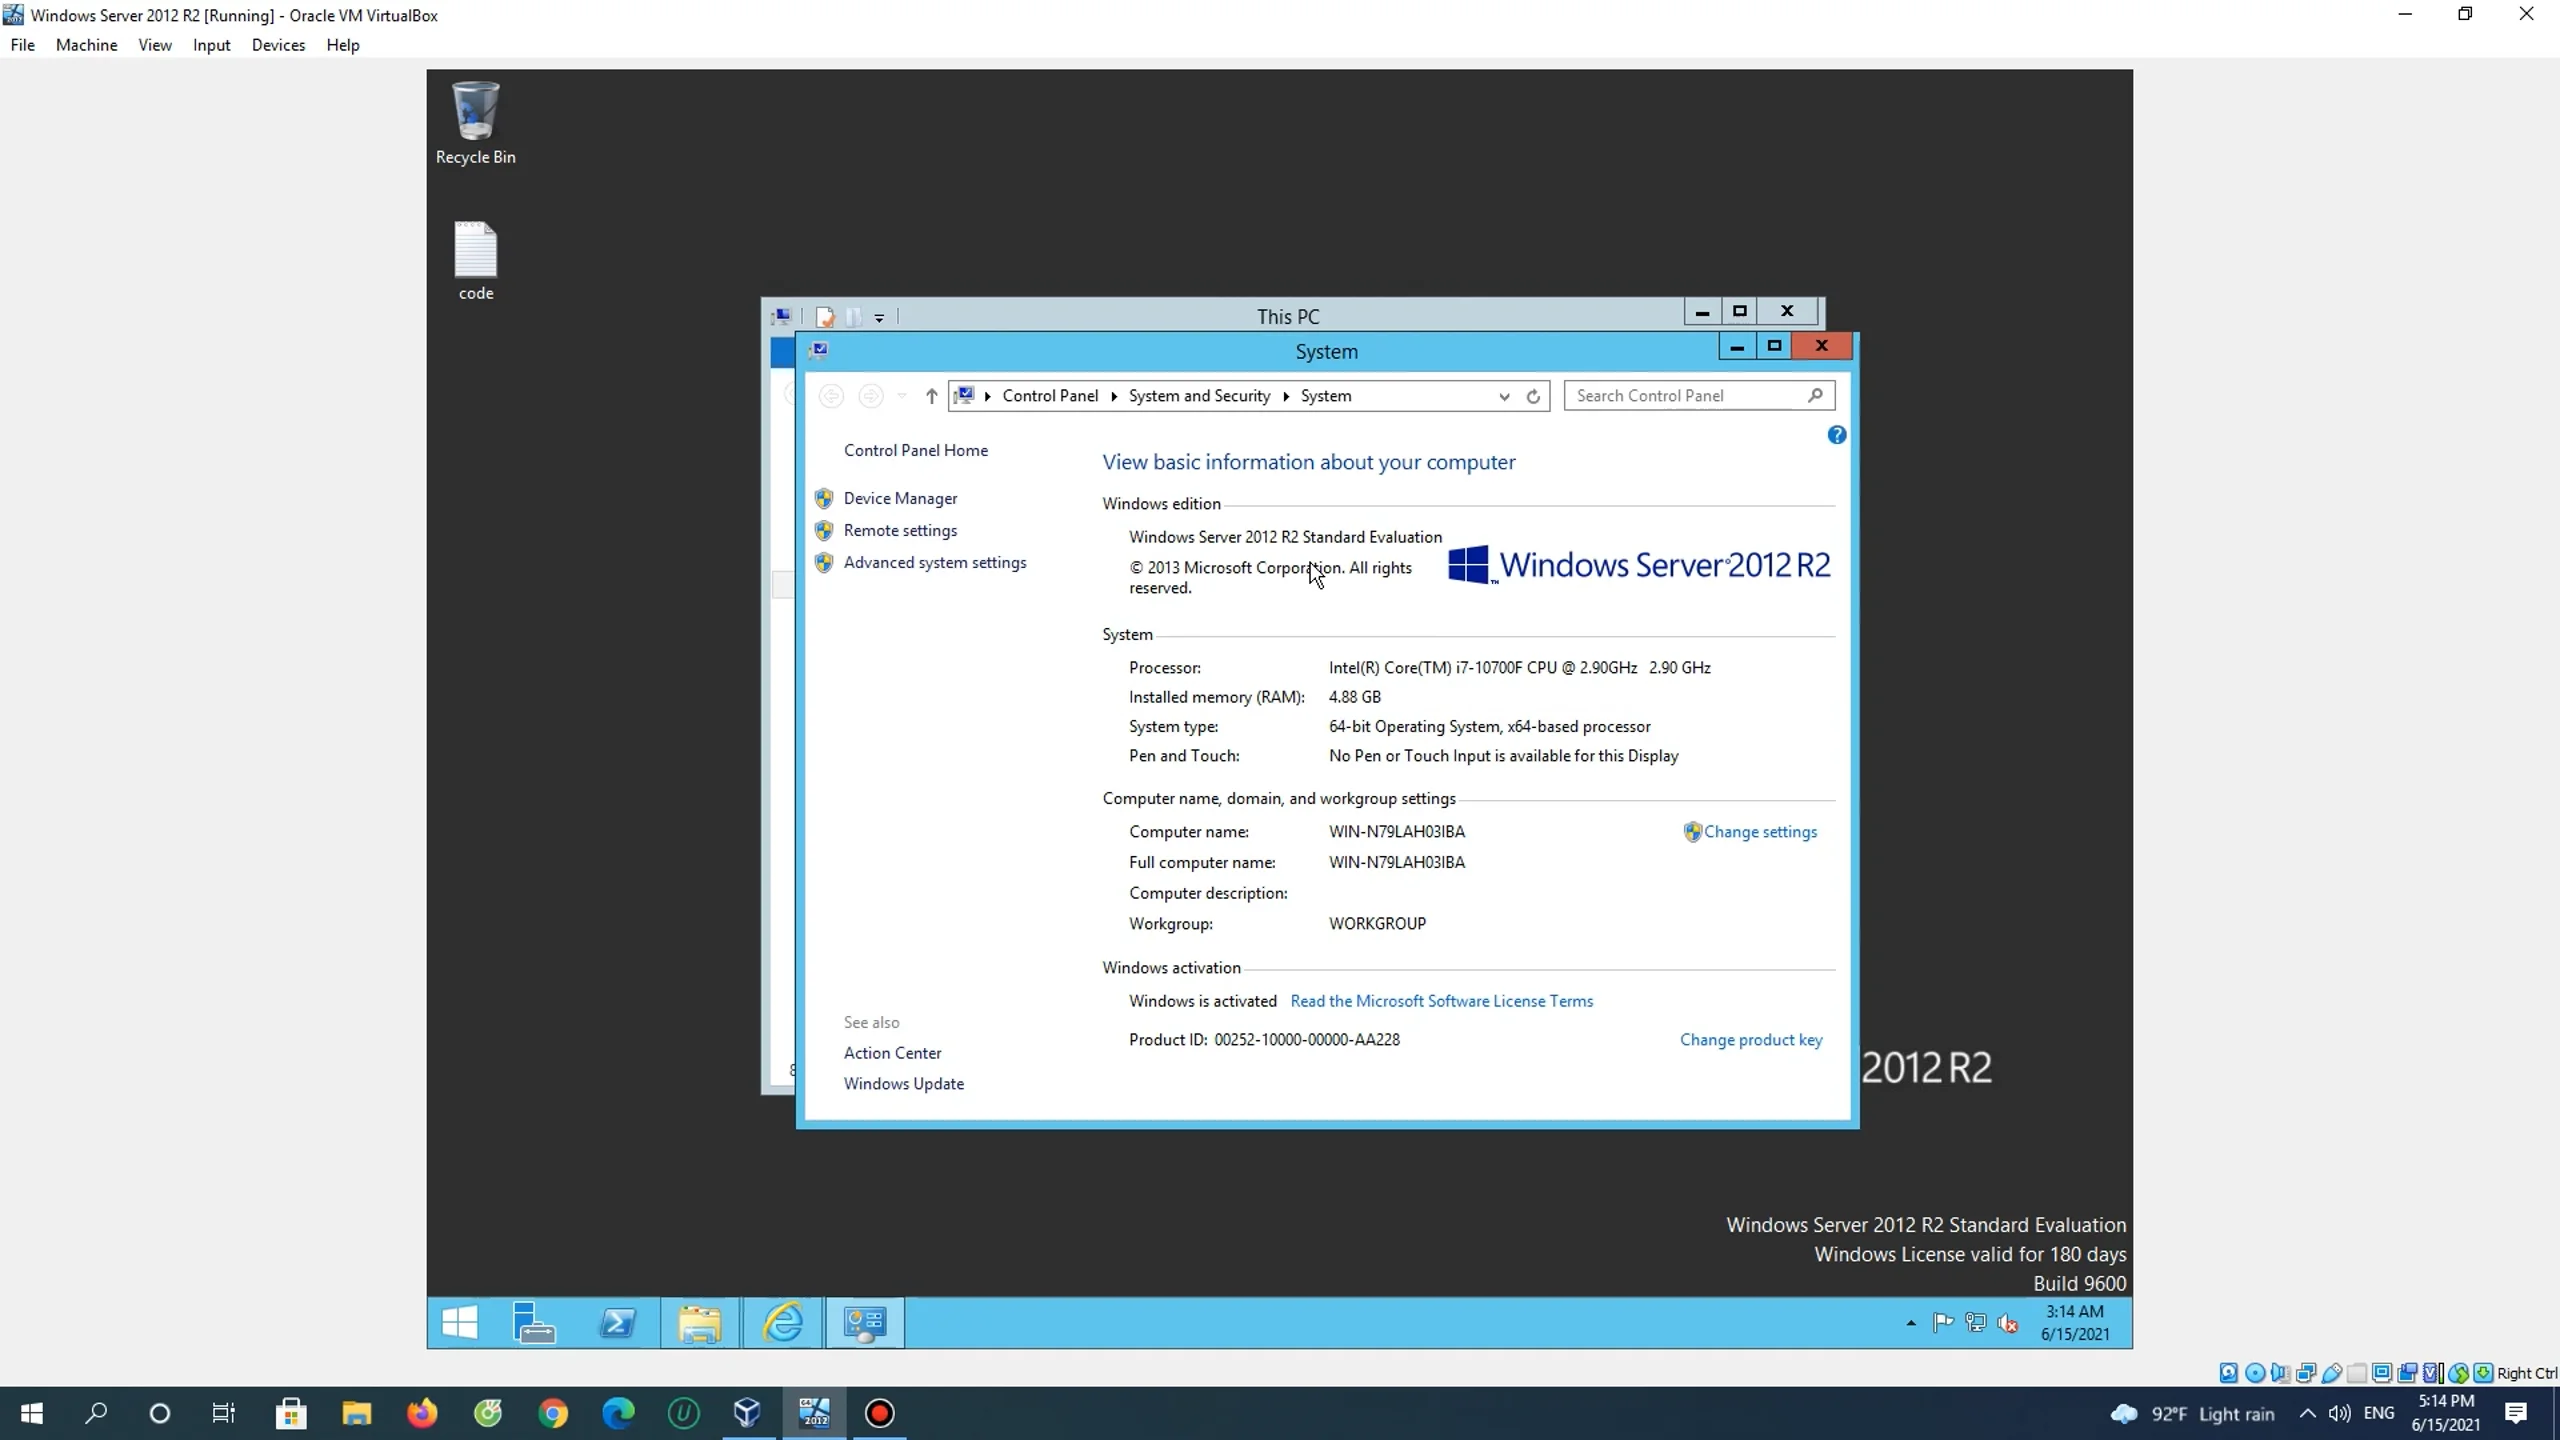 How To Activate Windows Server 2012 R2 Evaluation To Full Version On Vimeo 1795